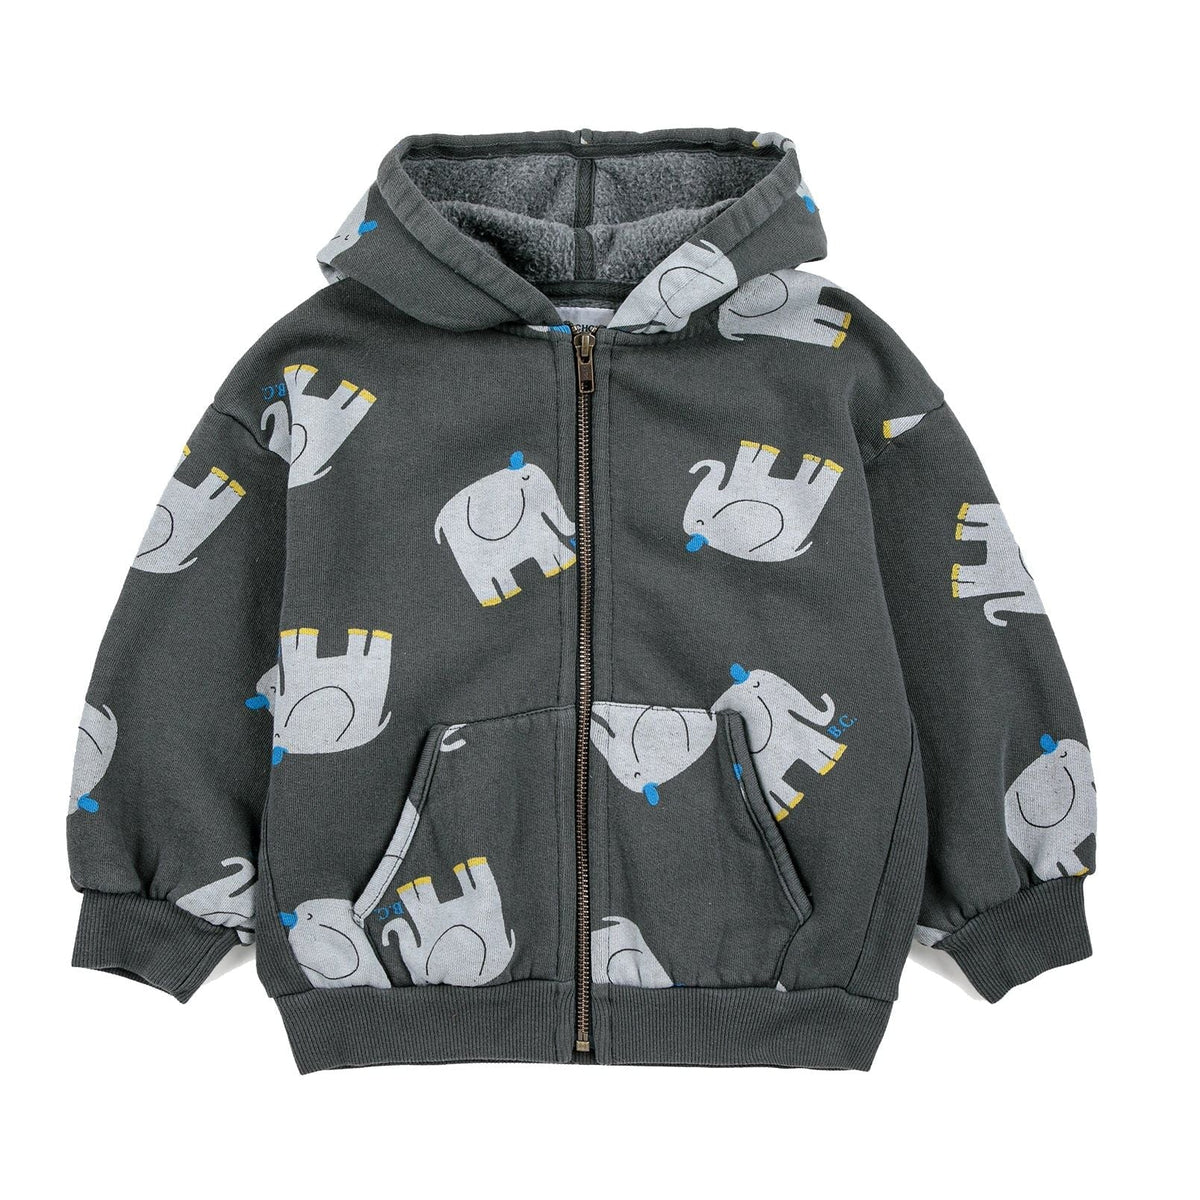 The Elephant All Over Zipped Hoodie